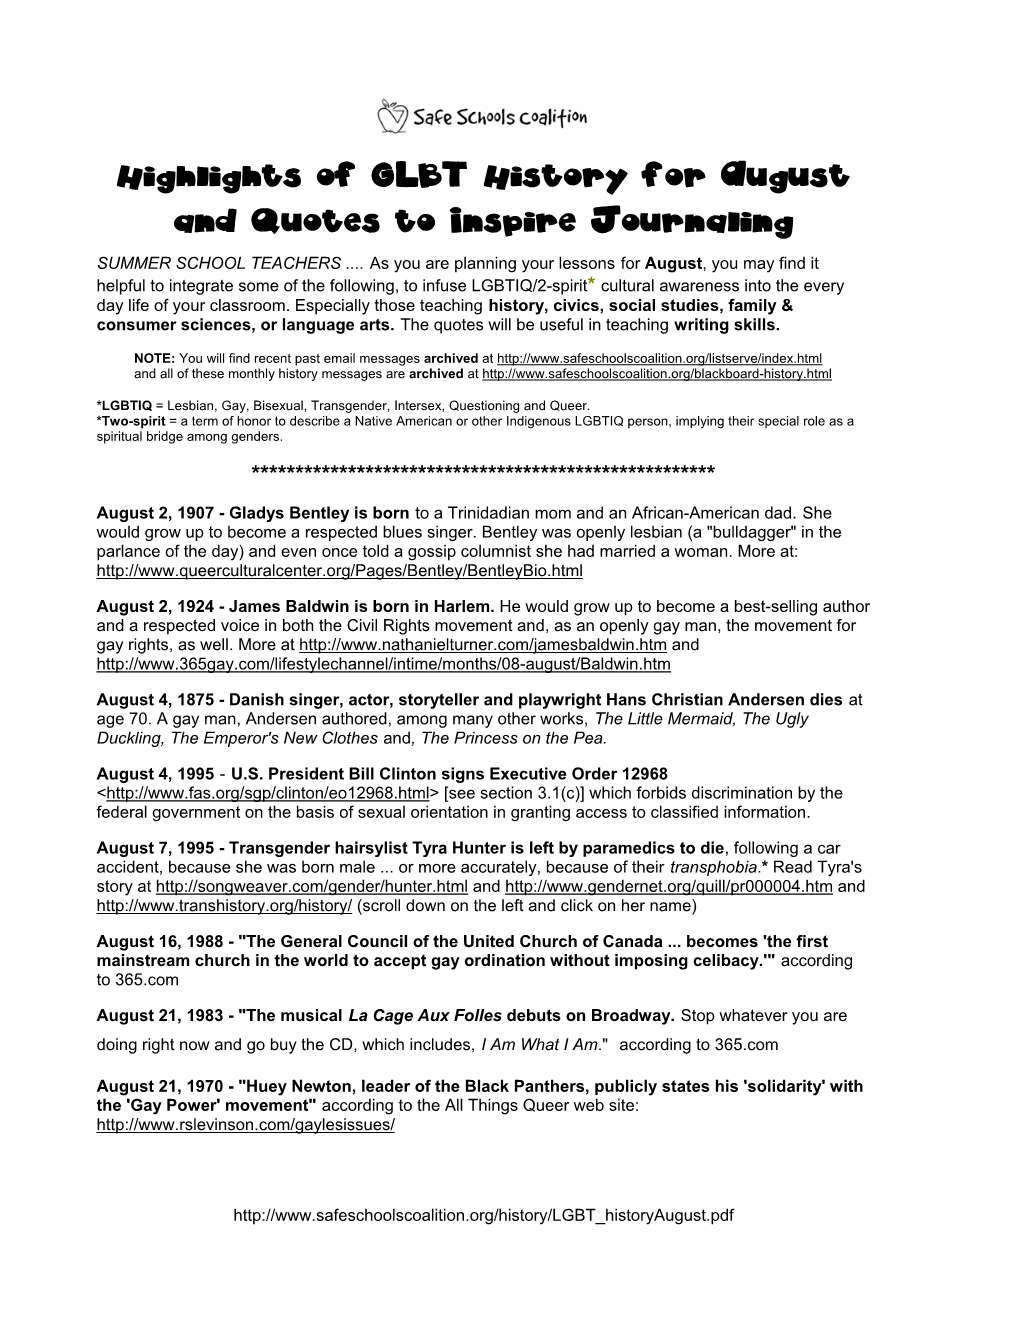 LGBT History August